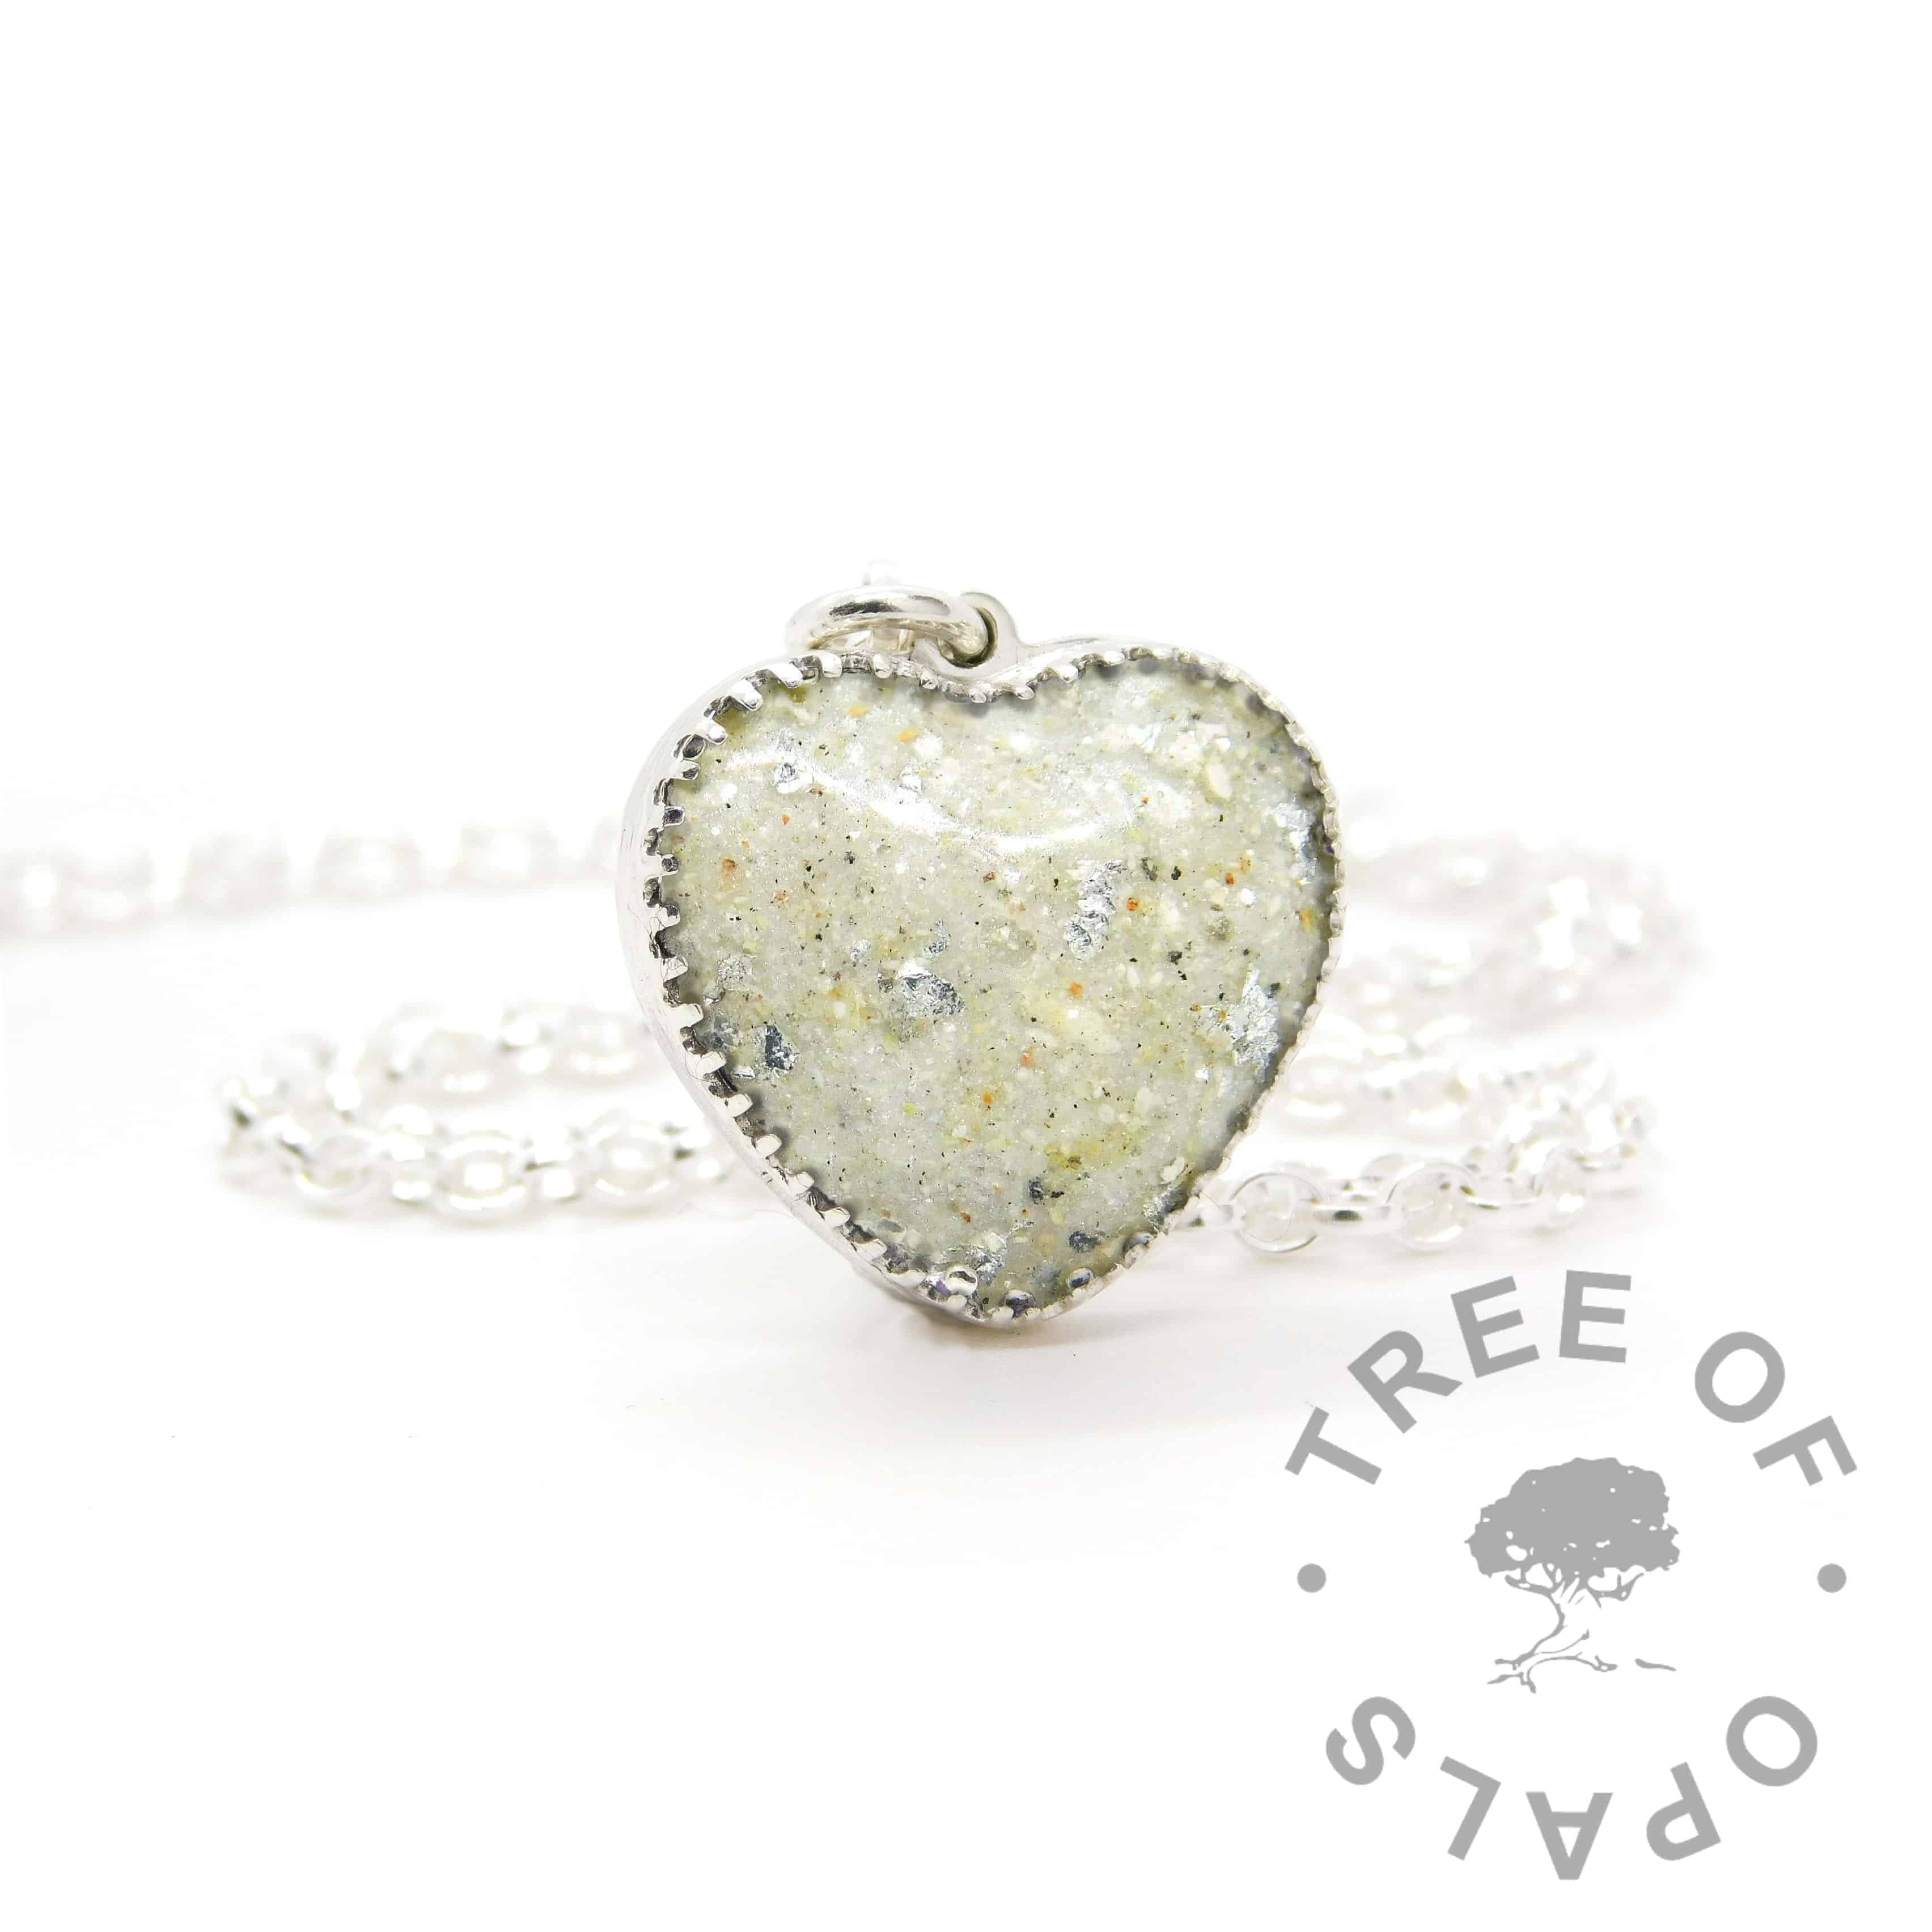 New style heart necklace setting with scalloped edge. Unicorn white resin sparkle mix, umbilical cord and silver leaf, shown with a medium classic chain upgrade (mockup of new setting)